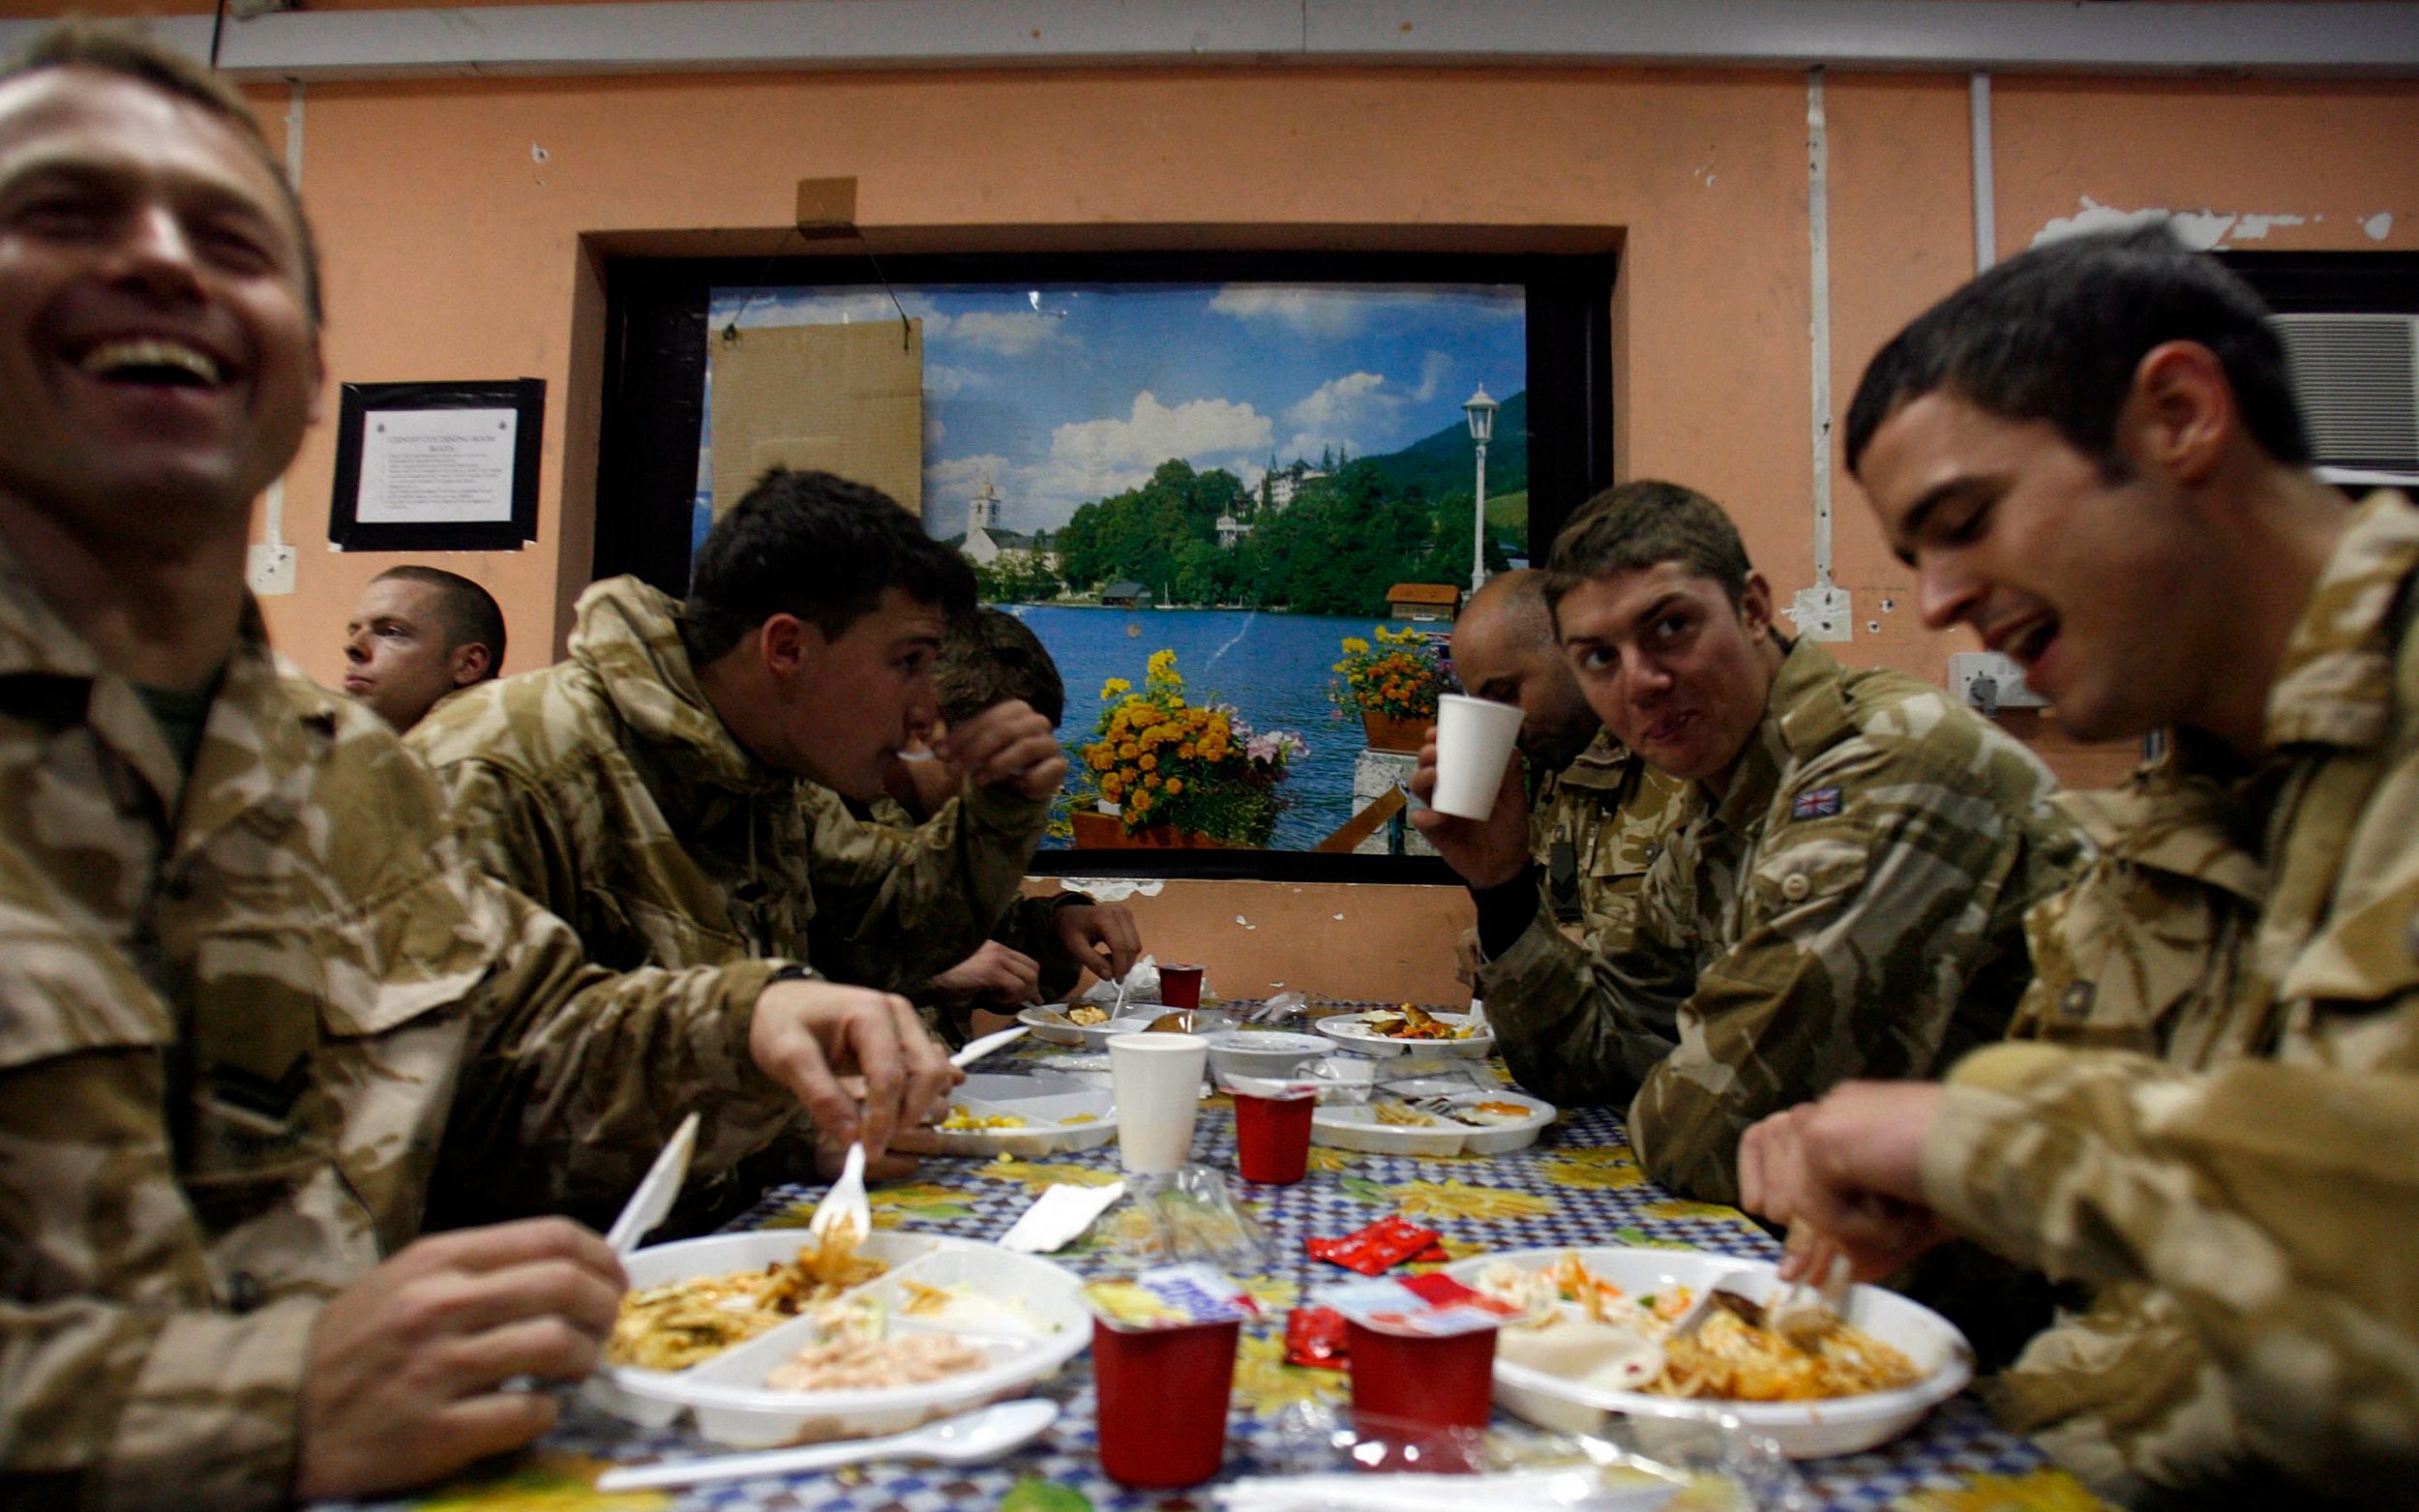 steak and lobster on the menu for soldiers – if they pay for it